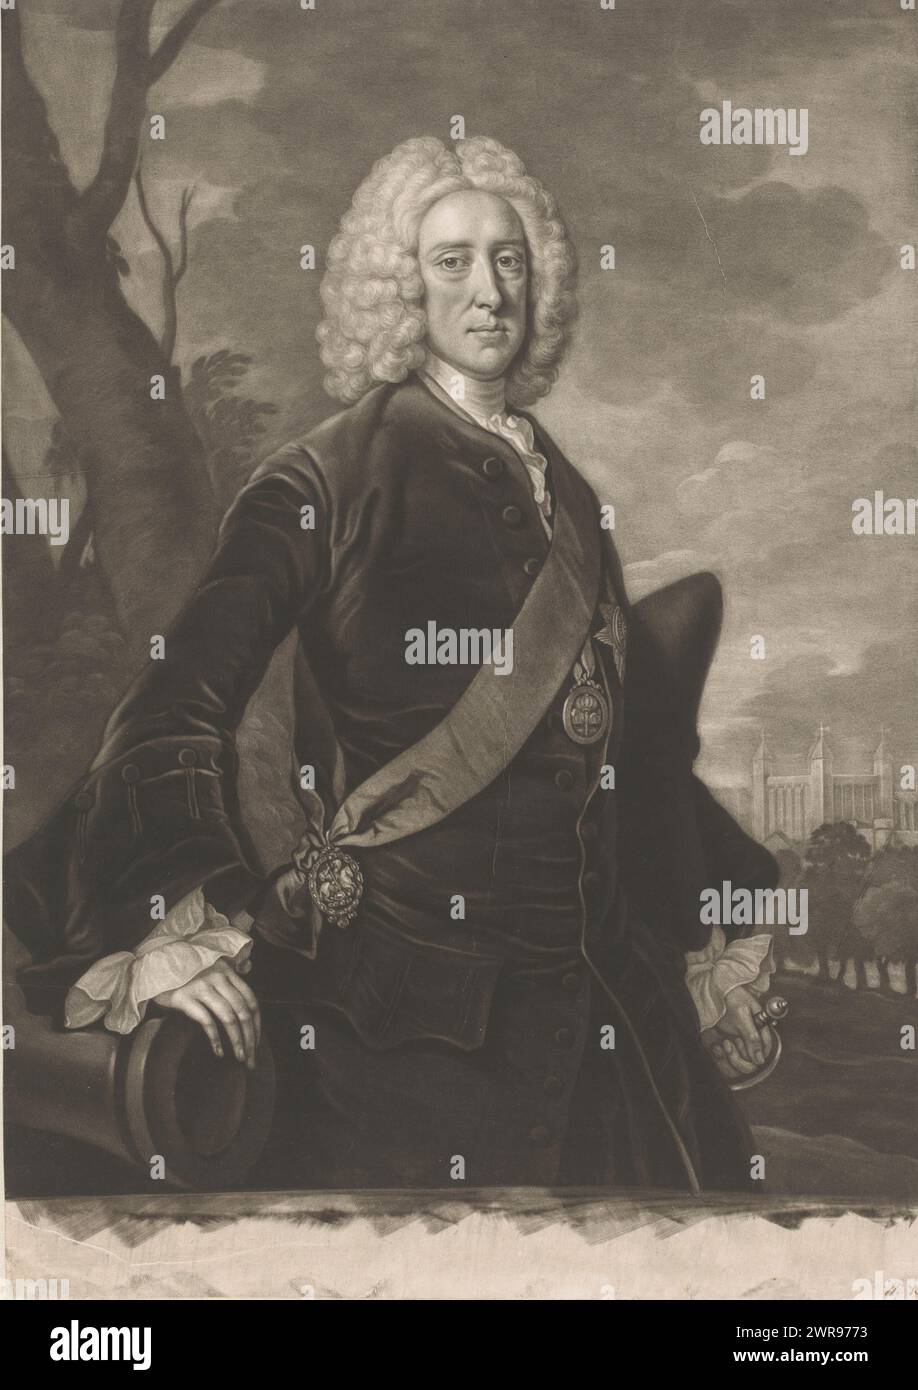 Portrait of John Montagu, print maker: James McArdell, after painting by: Thomas Hudson, London, c. 1745 - 1765, paper, height 427 mm × width 300 mm, print Stock Photo